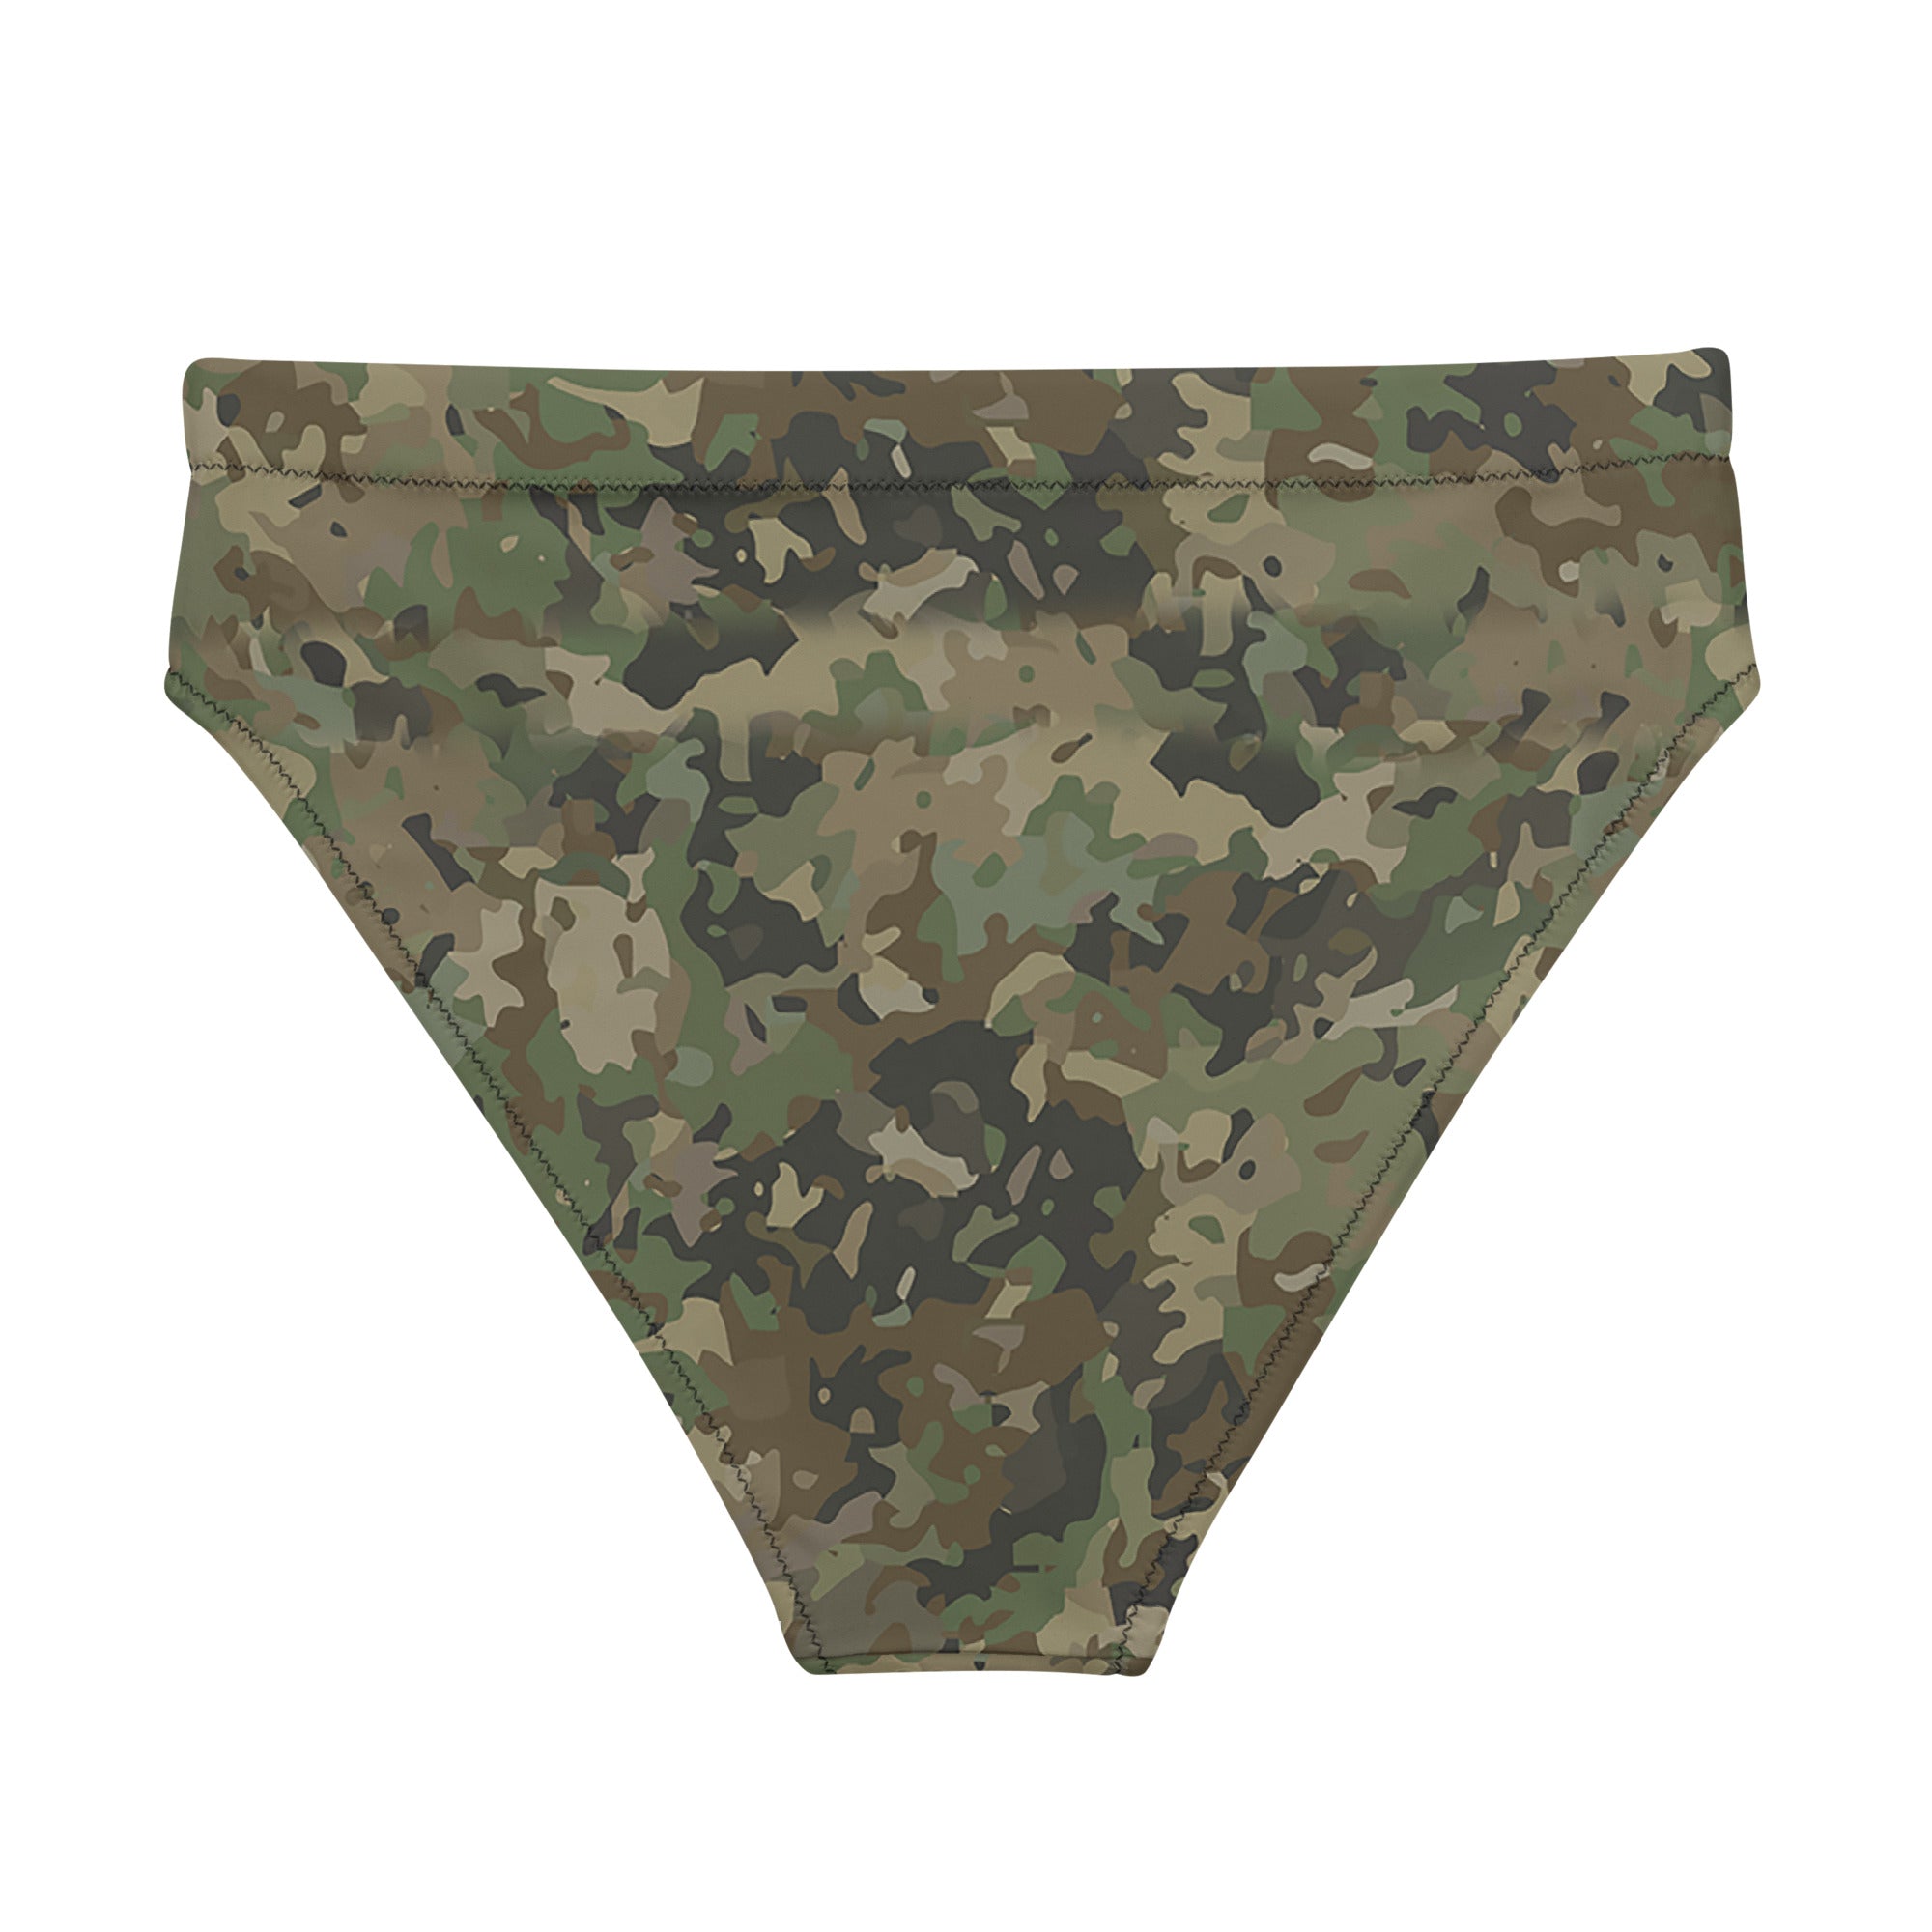 Embrace your adventurous side and make a fashion statement with our Camouflage Print Bikini Bottoms.